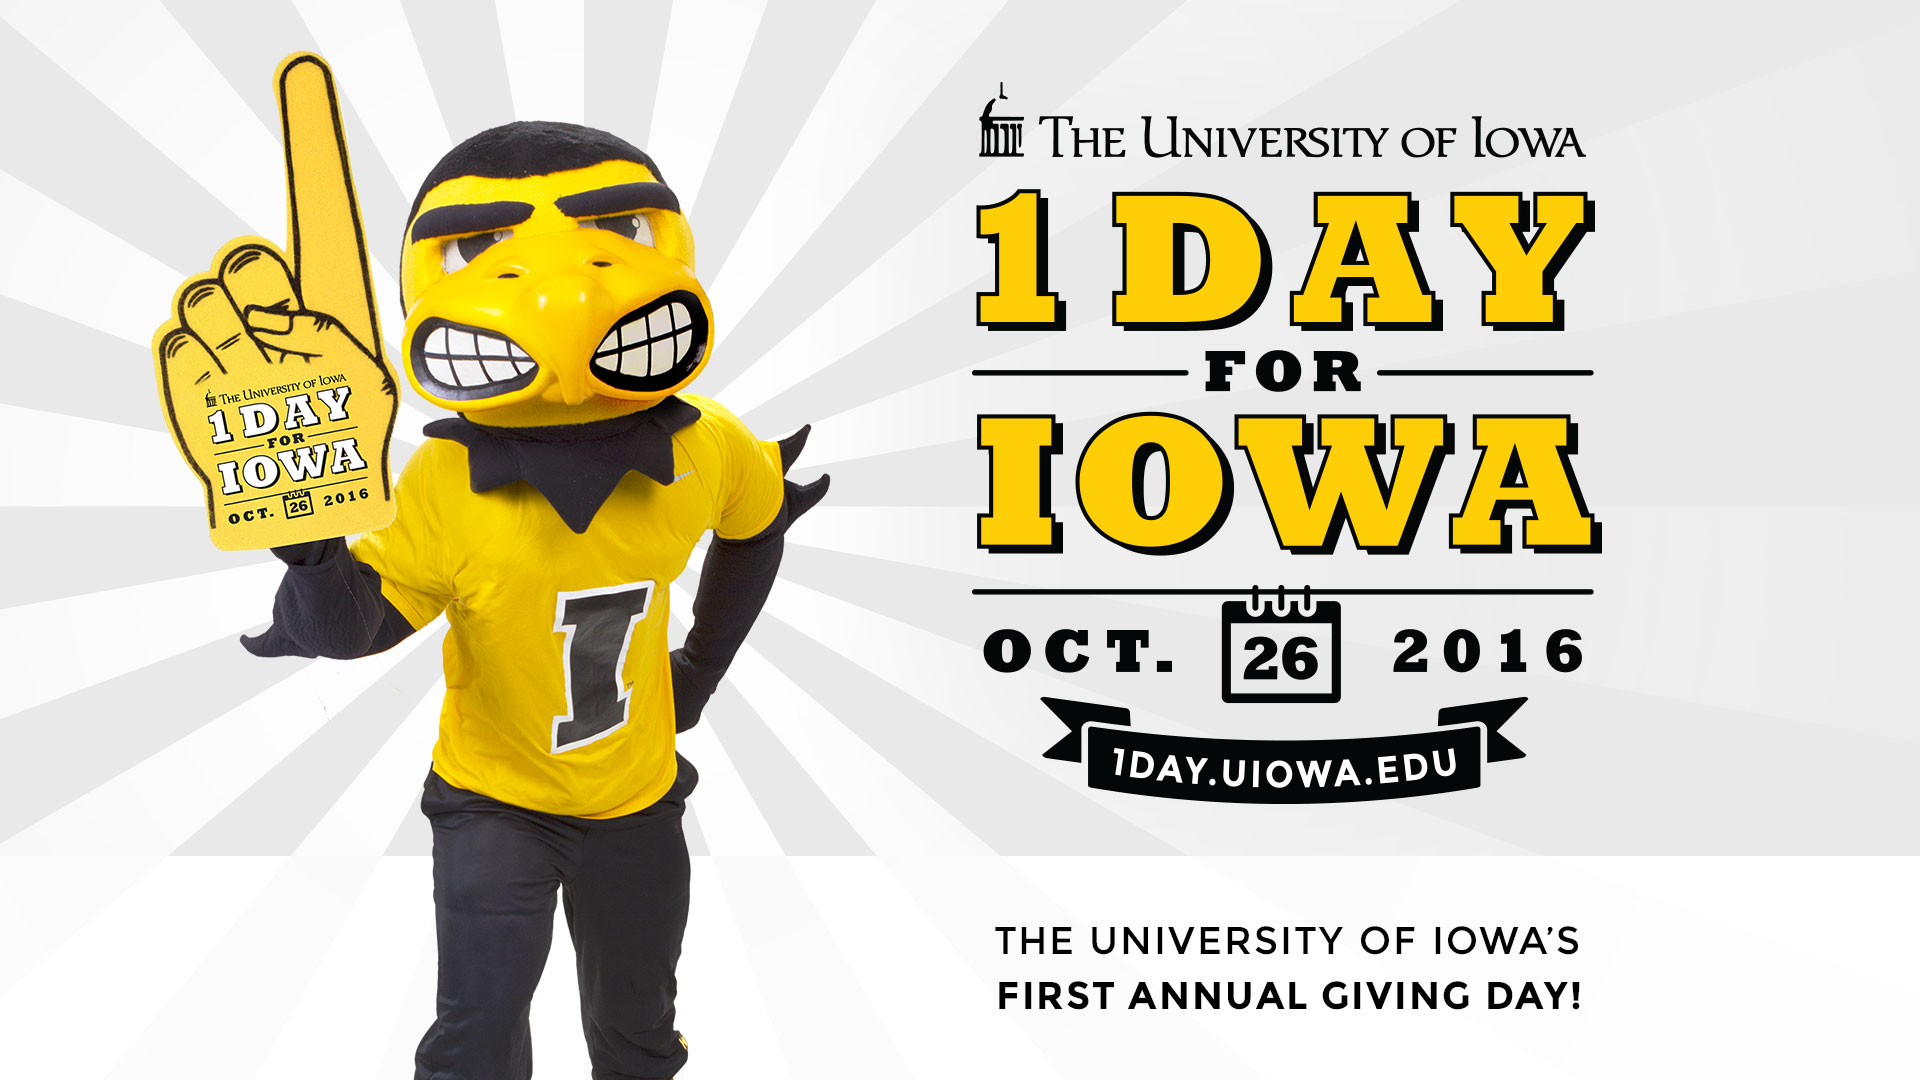 The University of Iowa 1 Day for Iowa, October 26, 2016.  1day.uiowa.edu, The University of Iowa's first annual giving day.